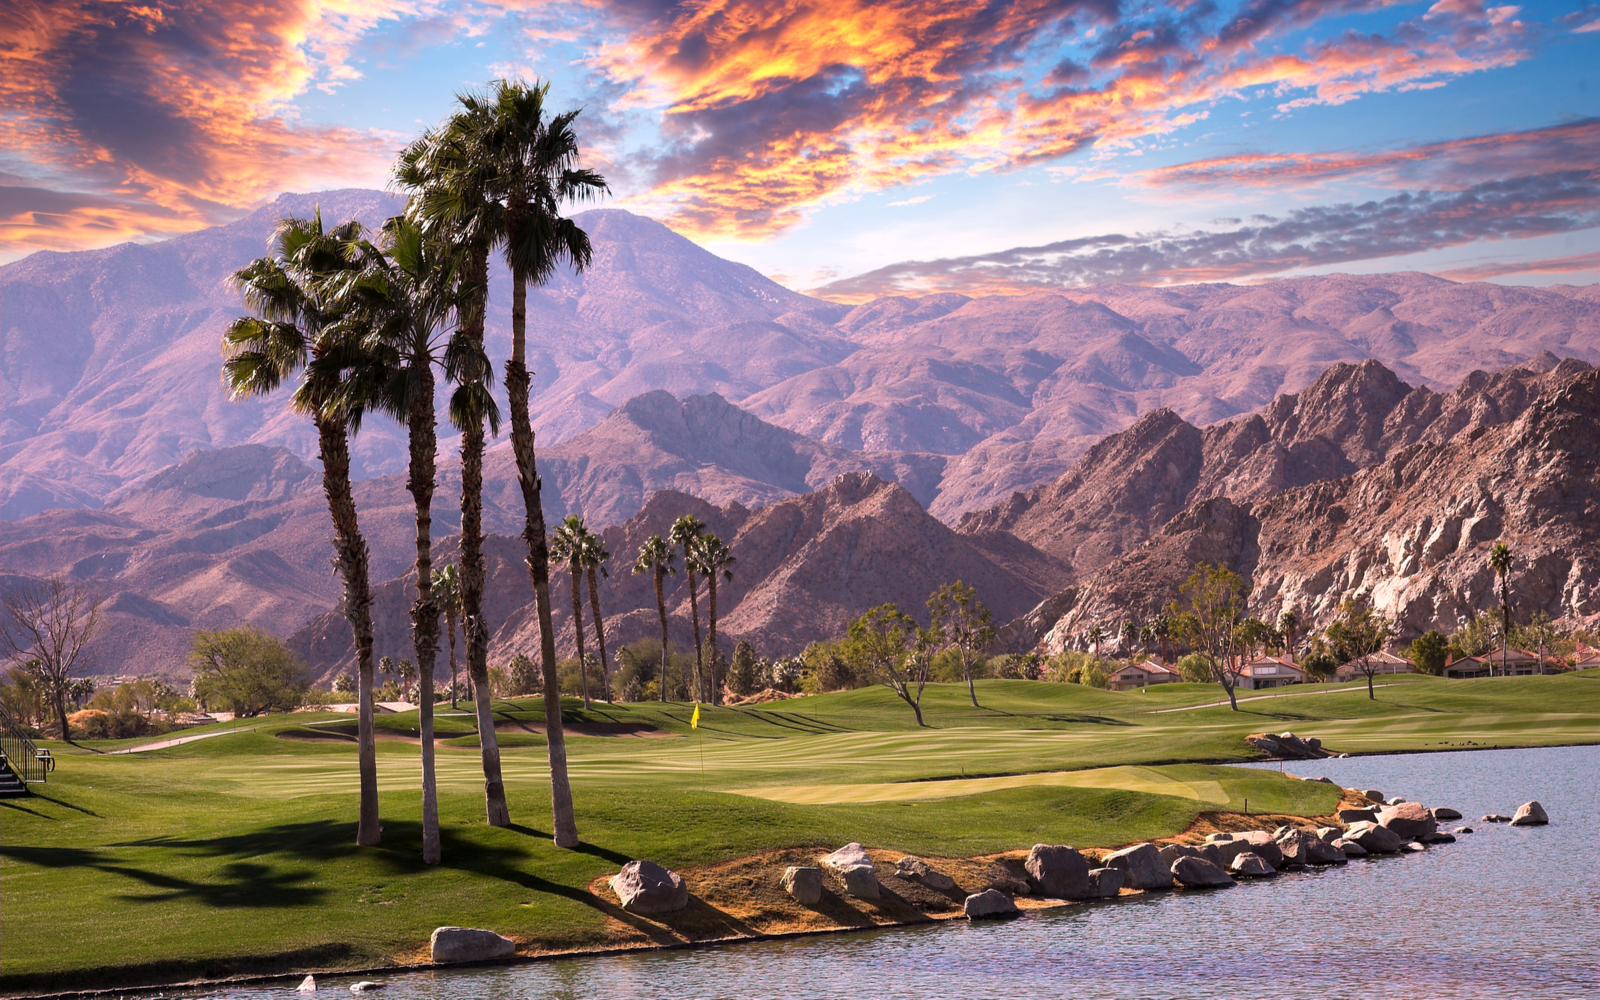 15 Best Things to Do in Palm Springs in 2022